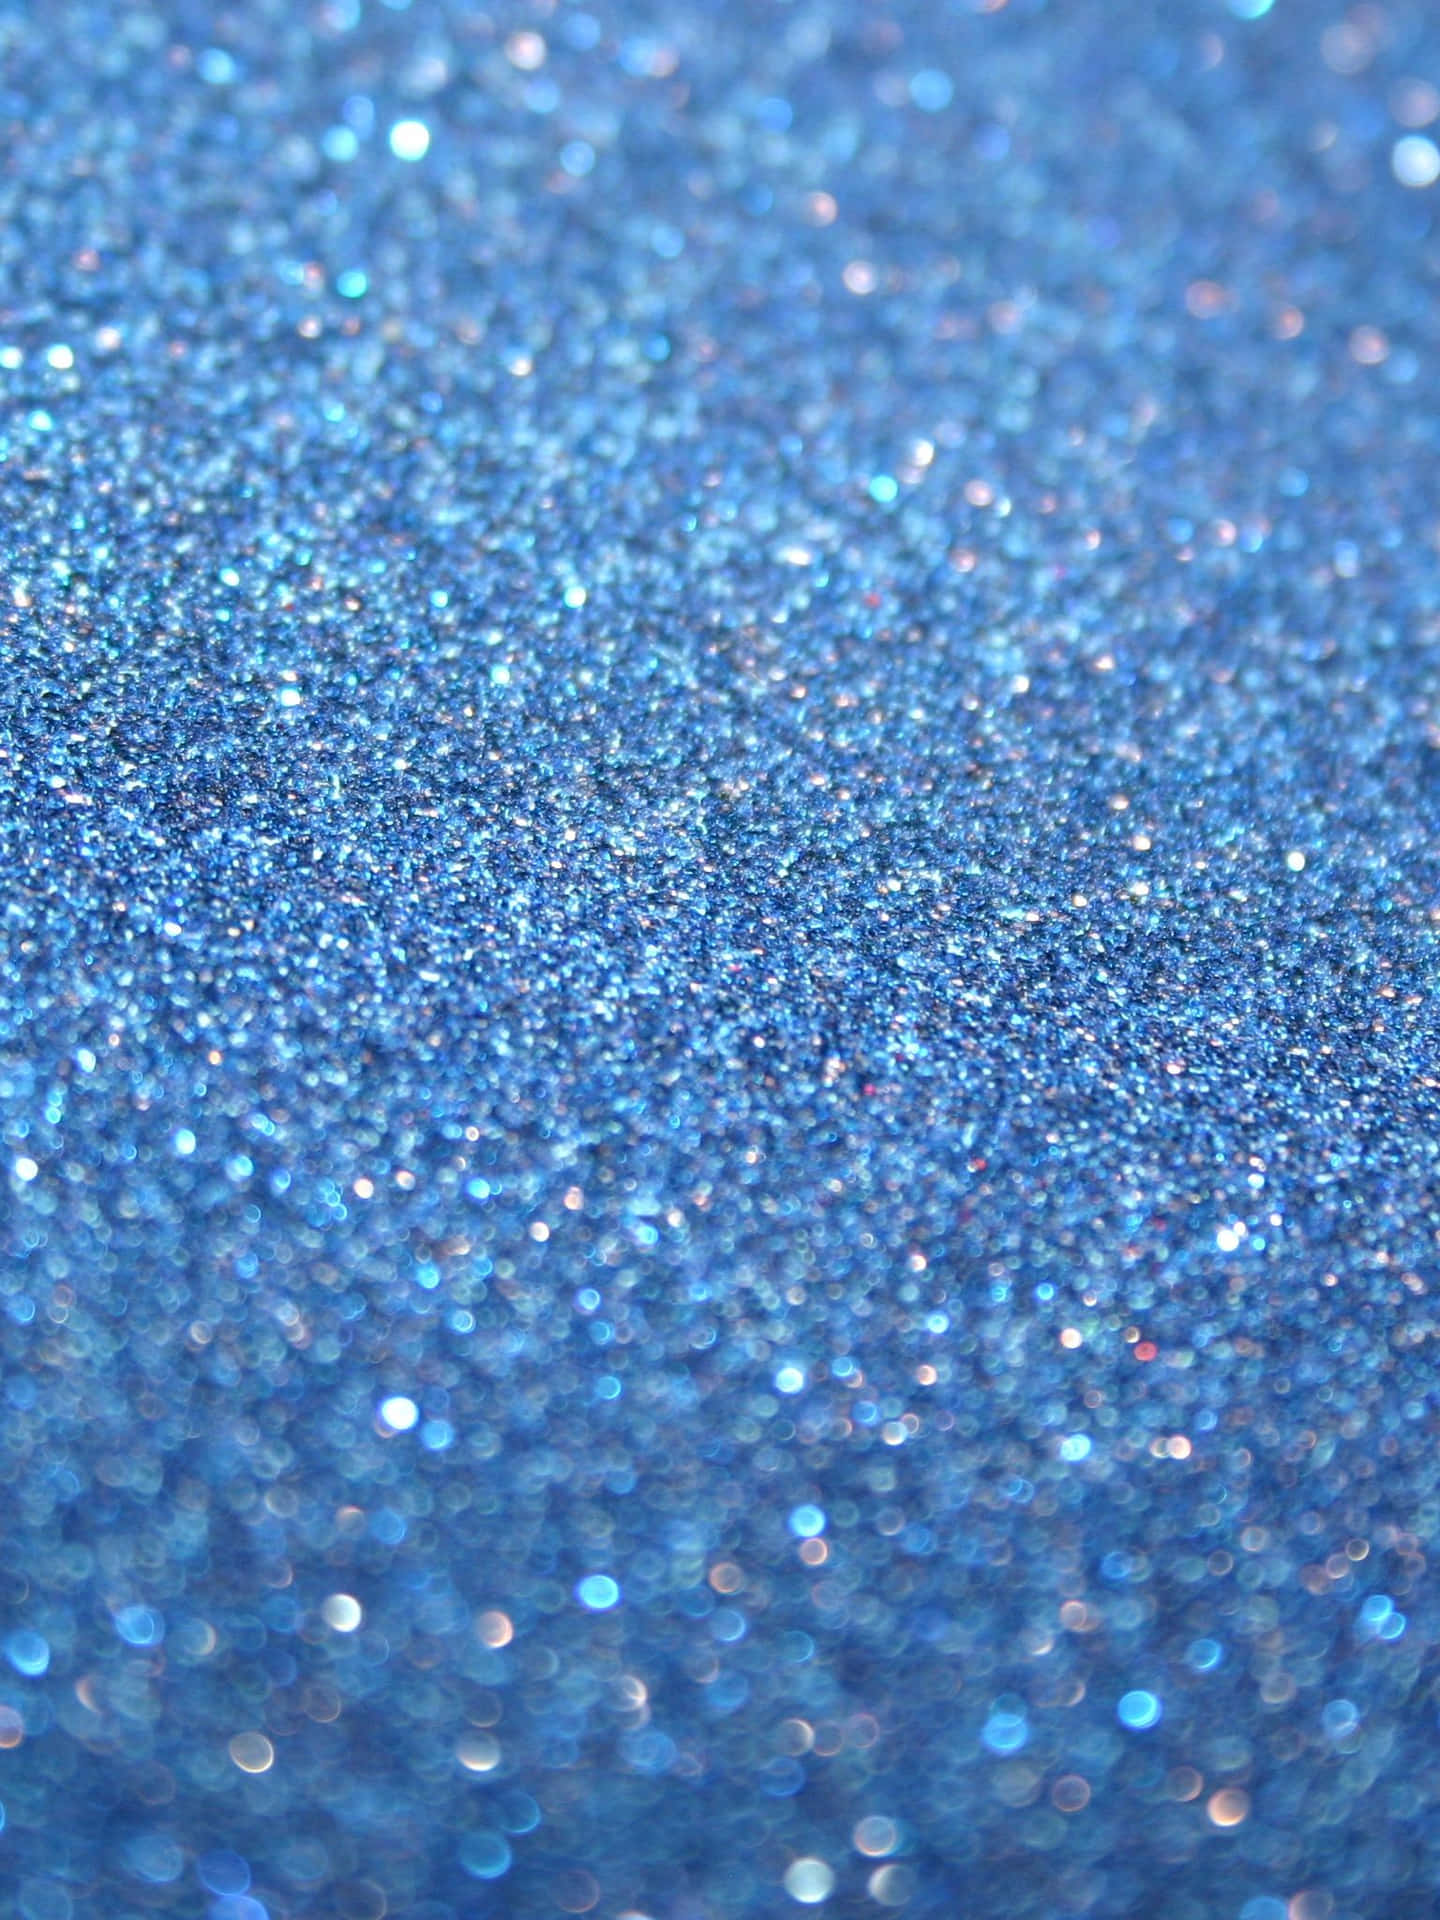 "Go bold with this Blue Sparkle Background!"